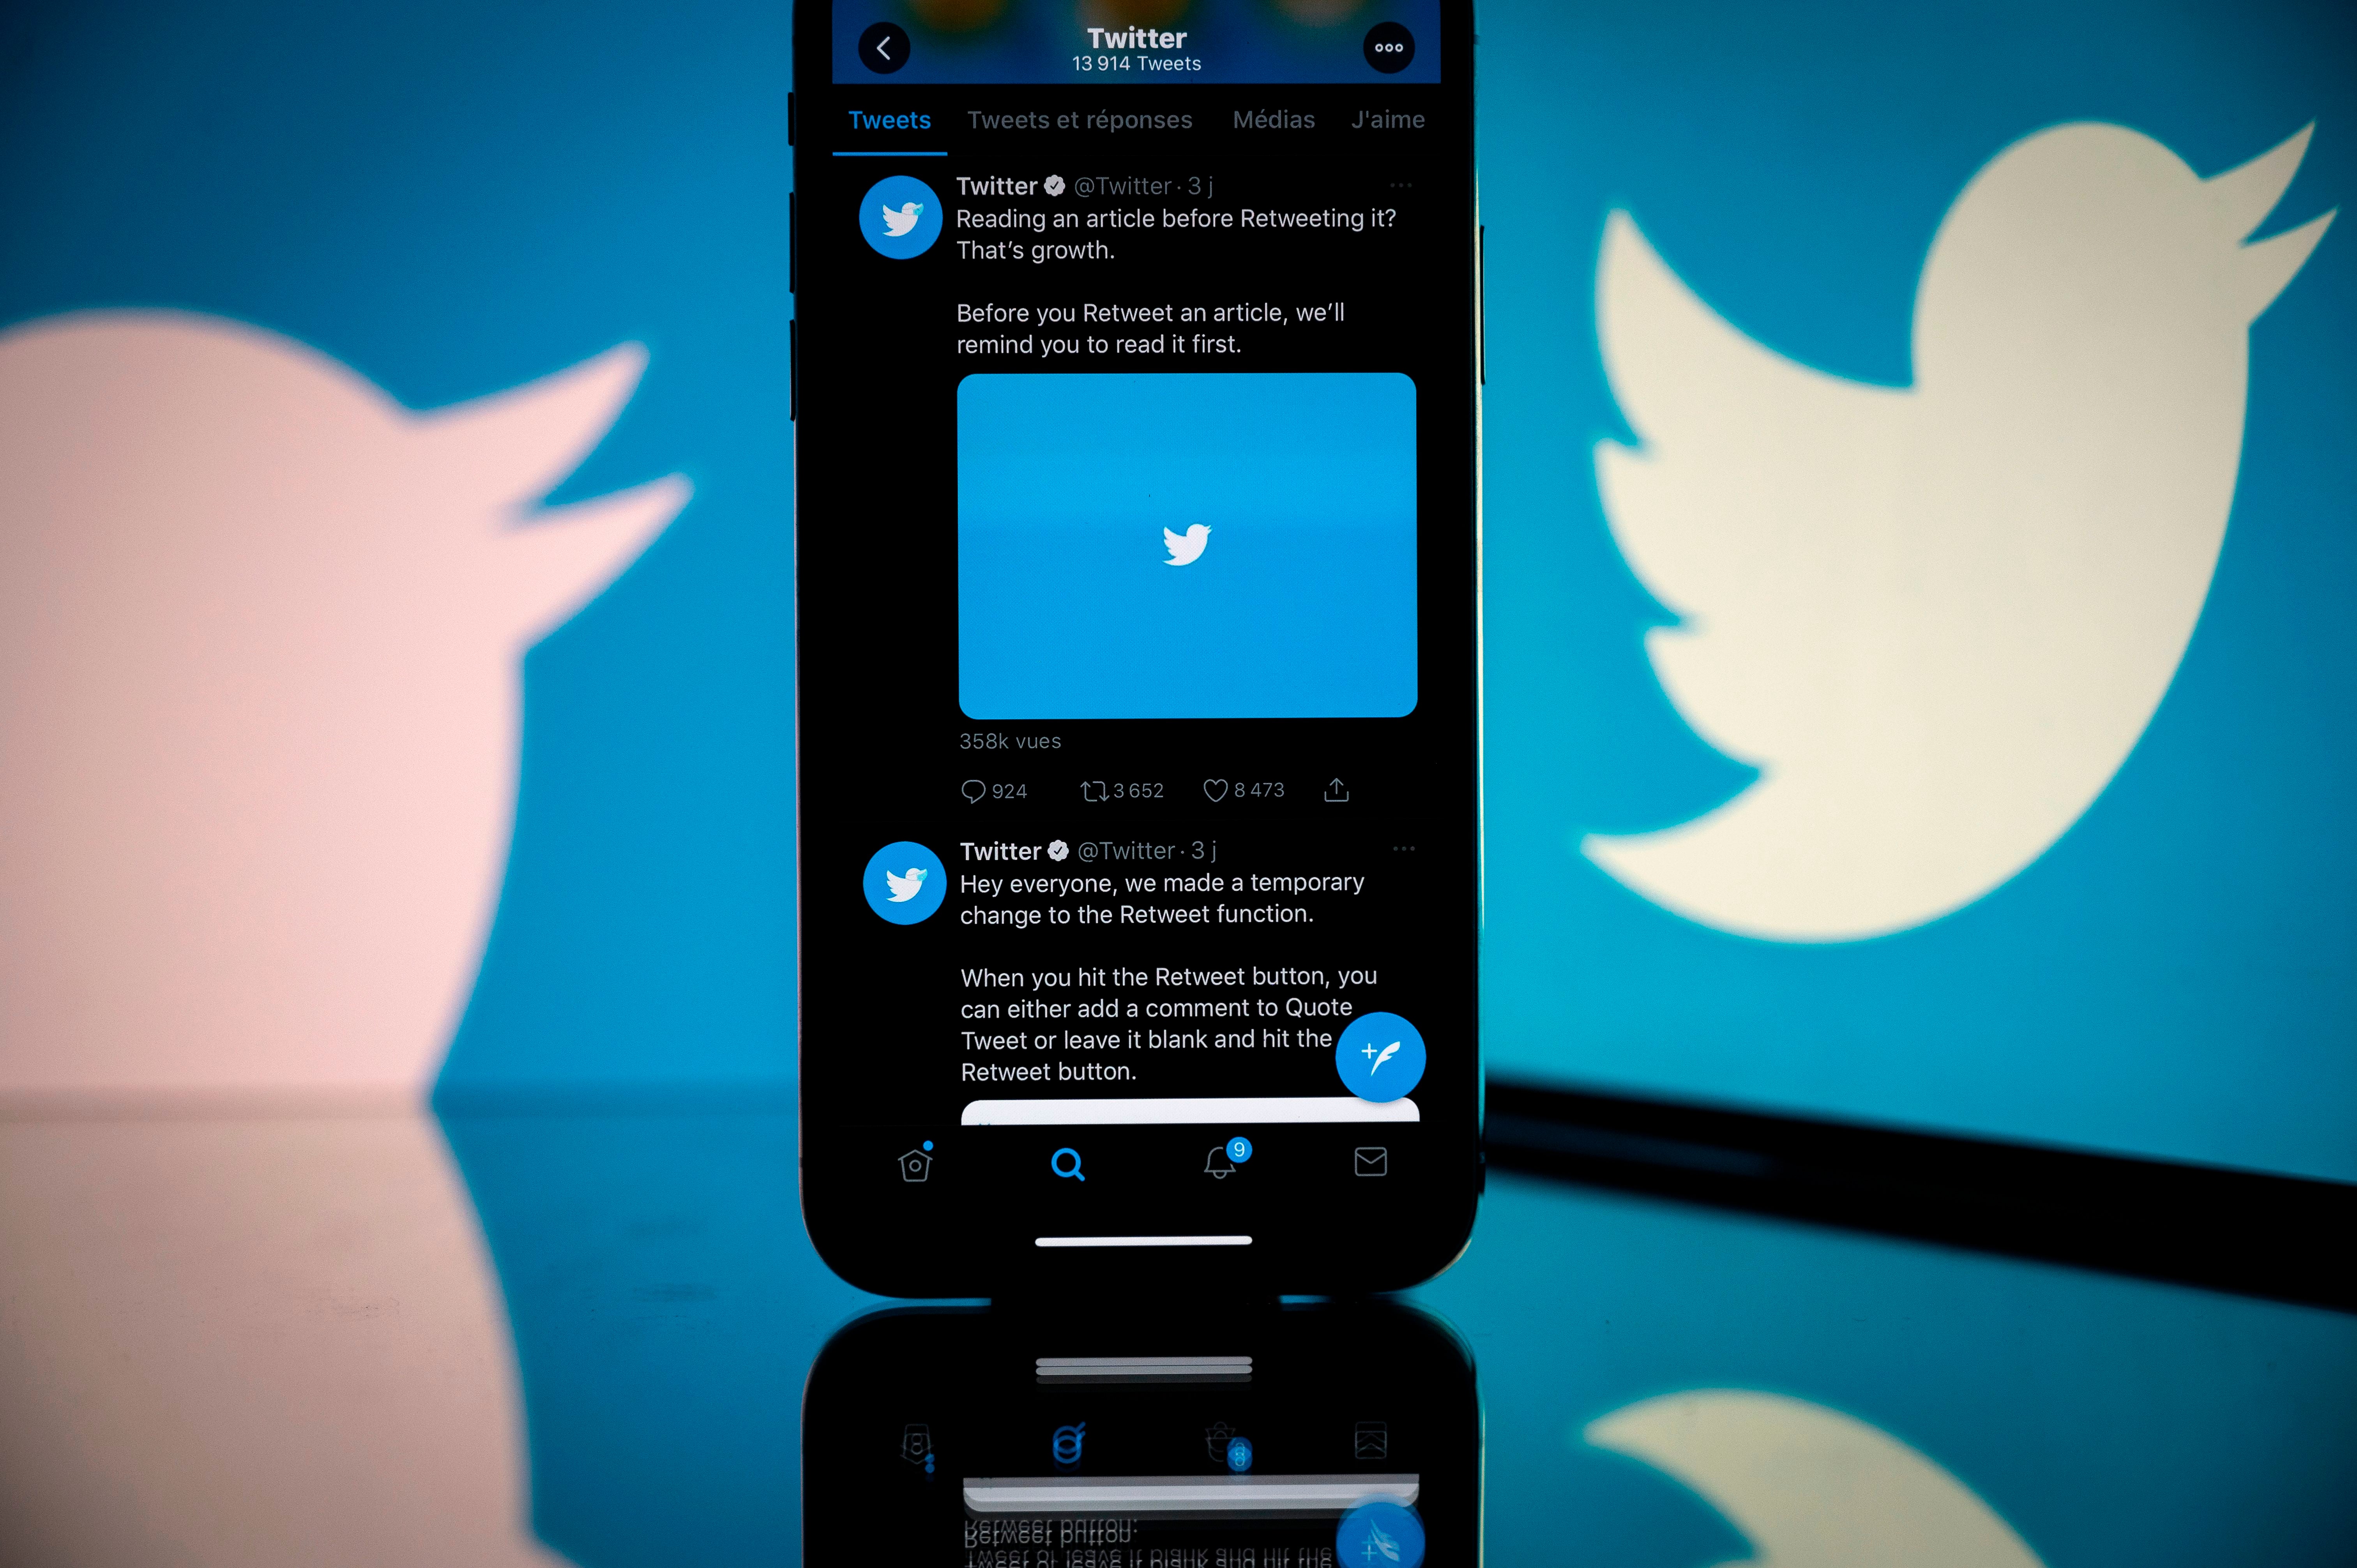 File: Bluesky is a decentralised social media network project funded by Twitter